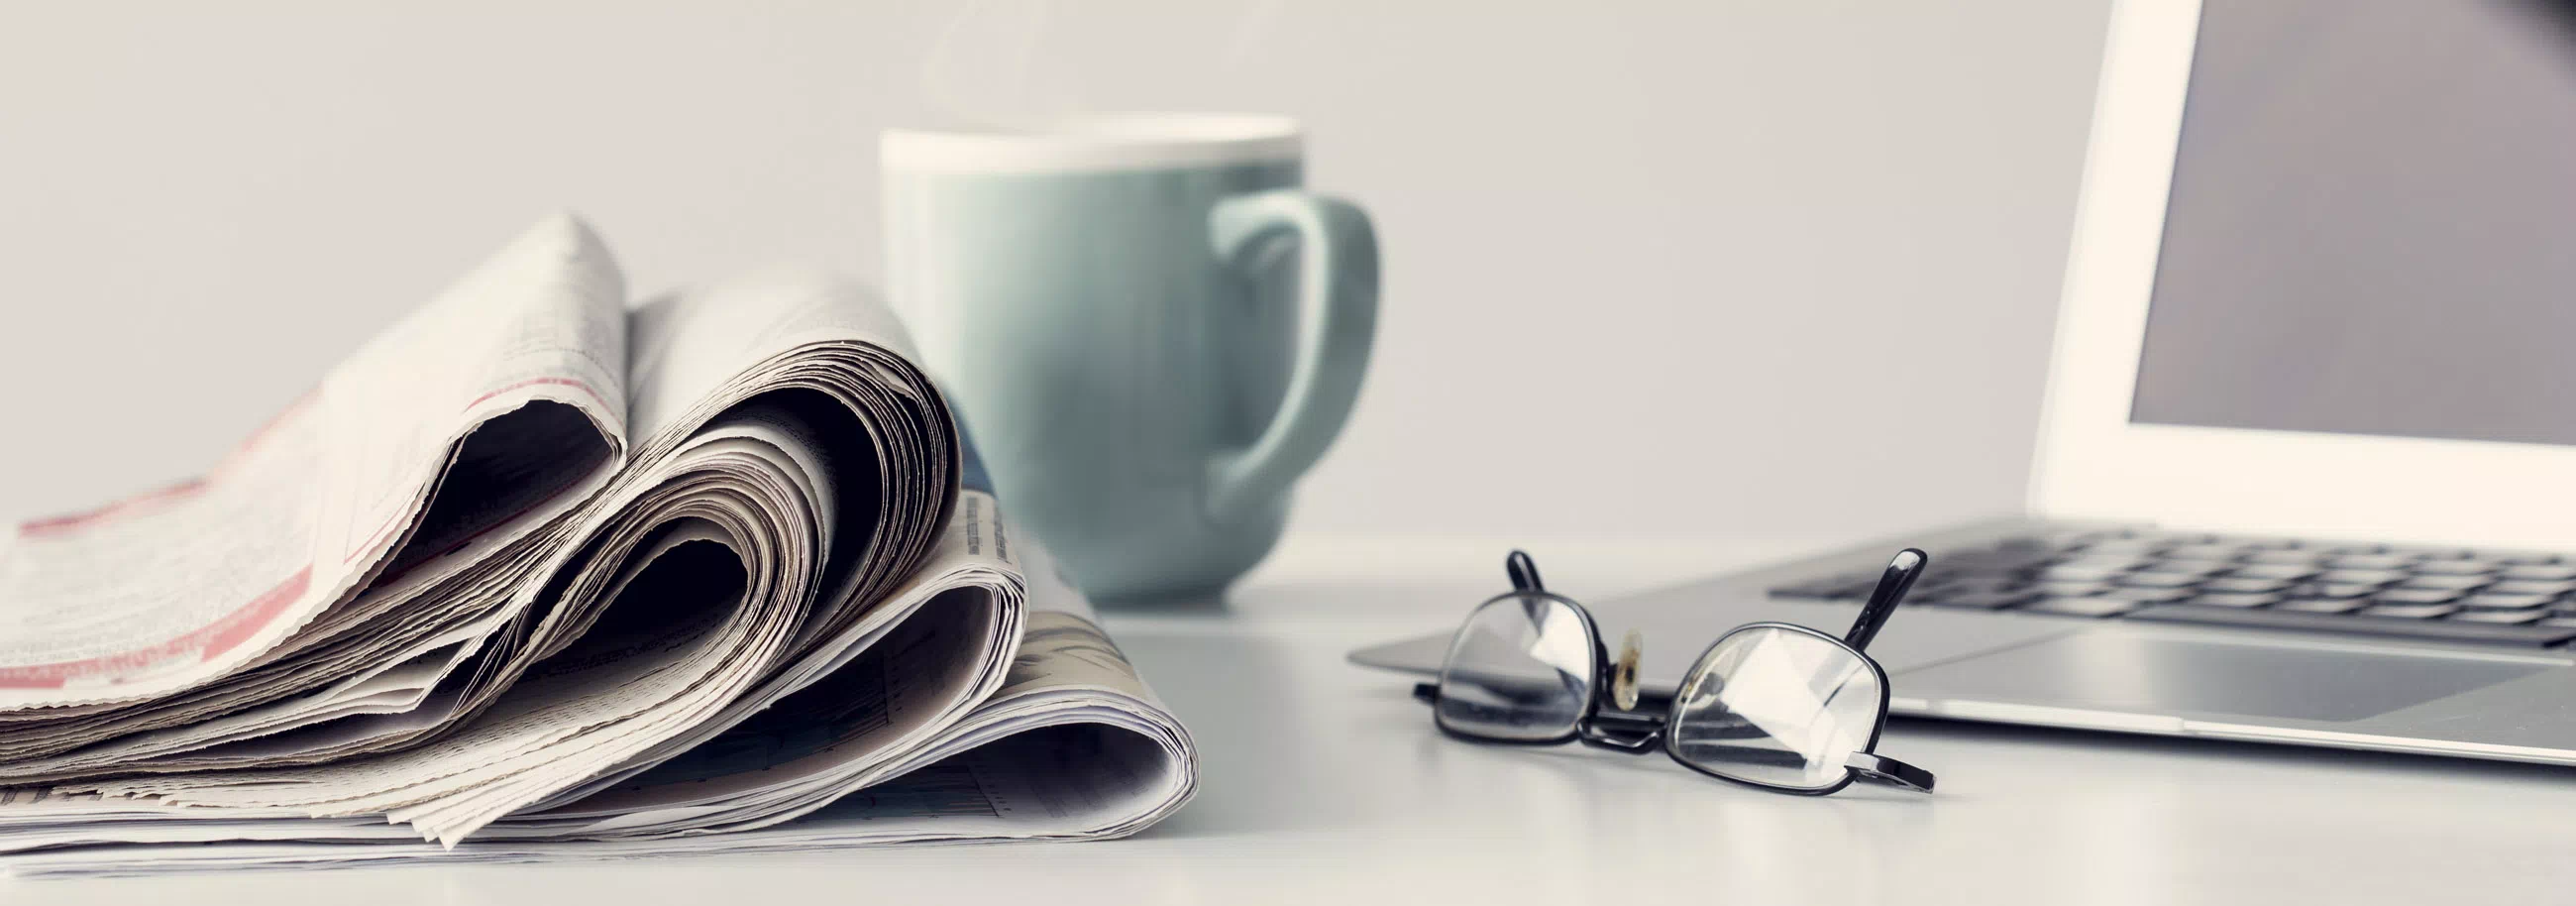 newspapers, reading glasses, a pen, and a cup of coffee on a table